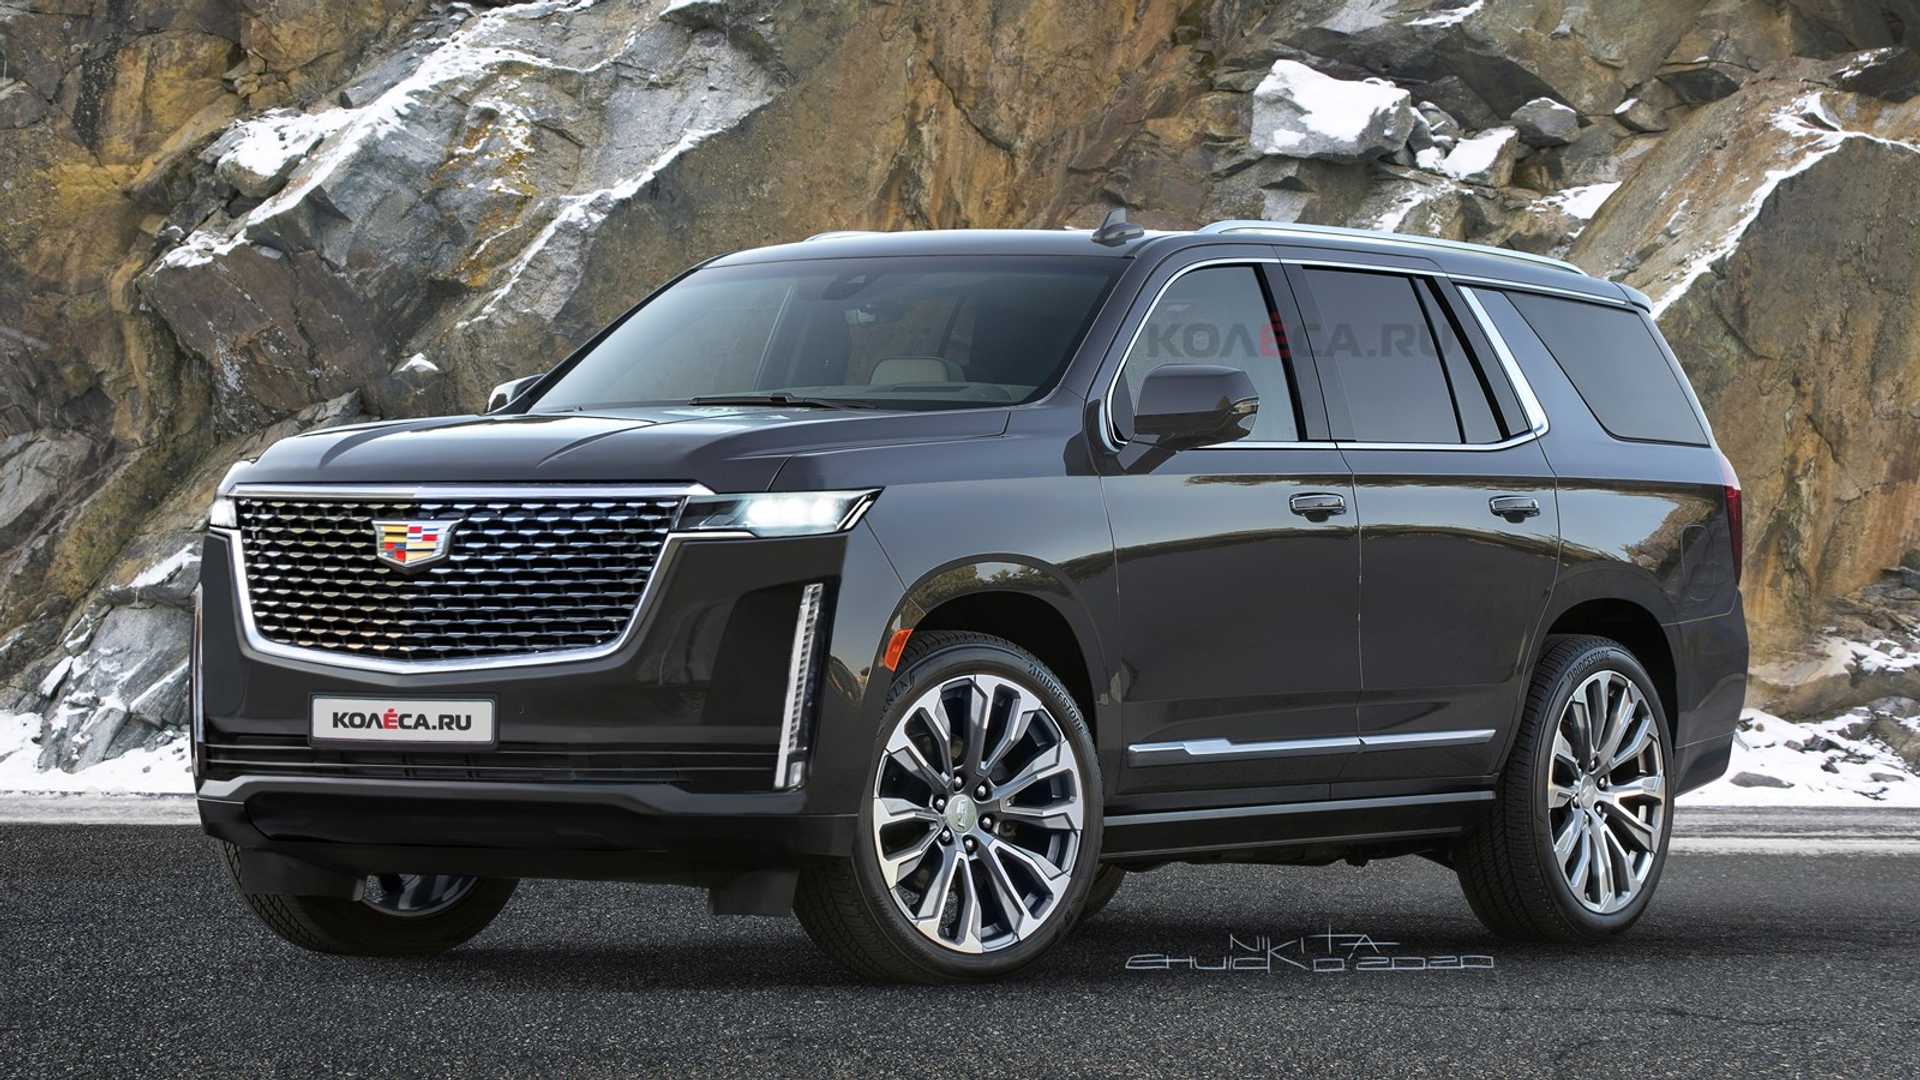 Cadillac Escalade Rendered Based On Teasers